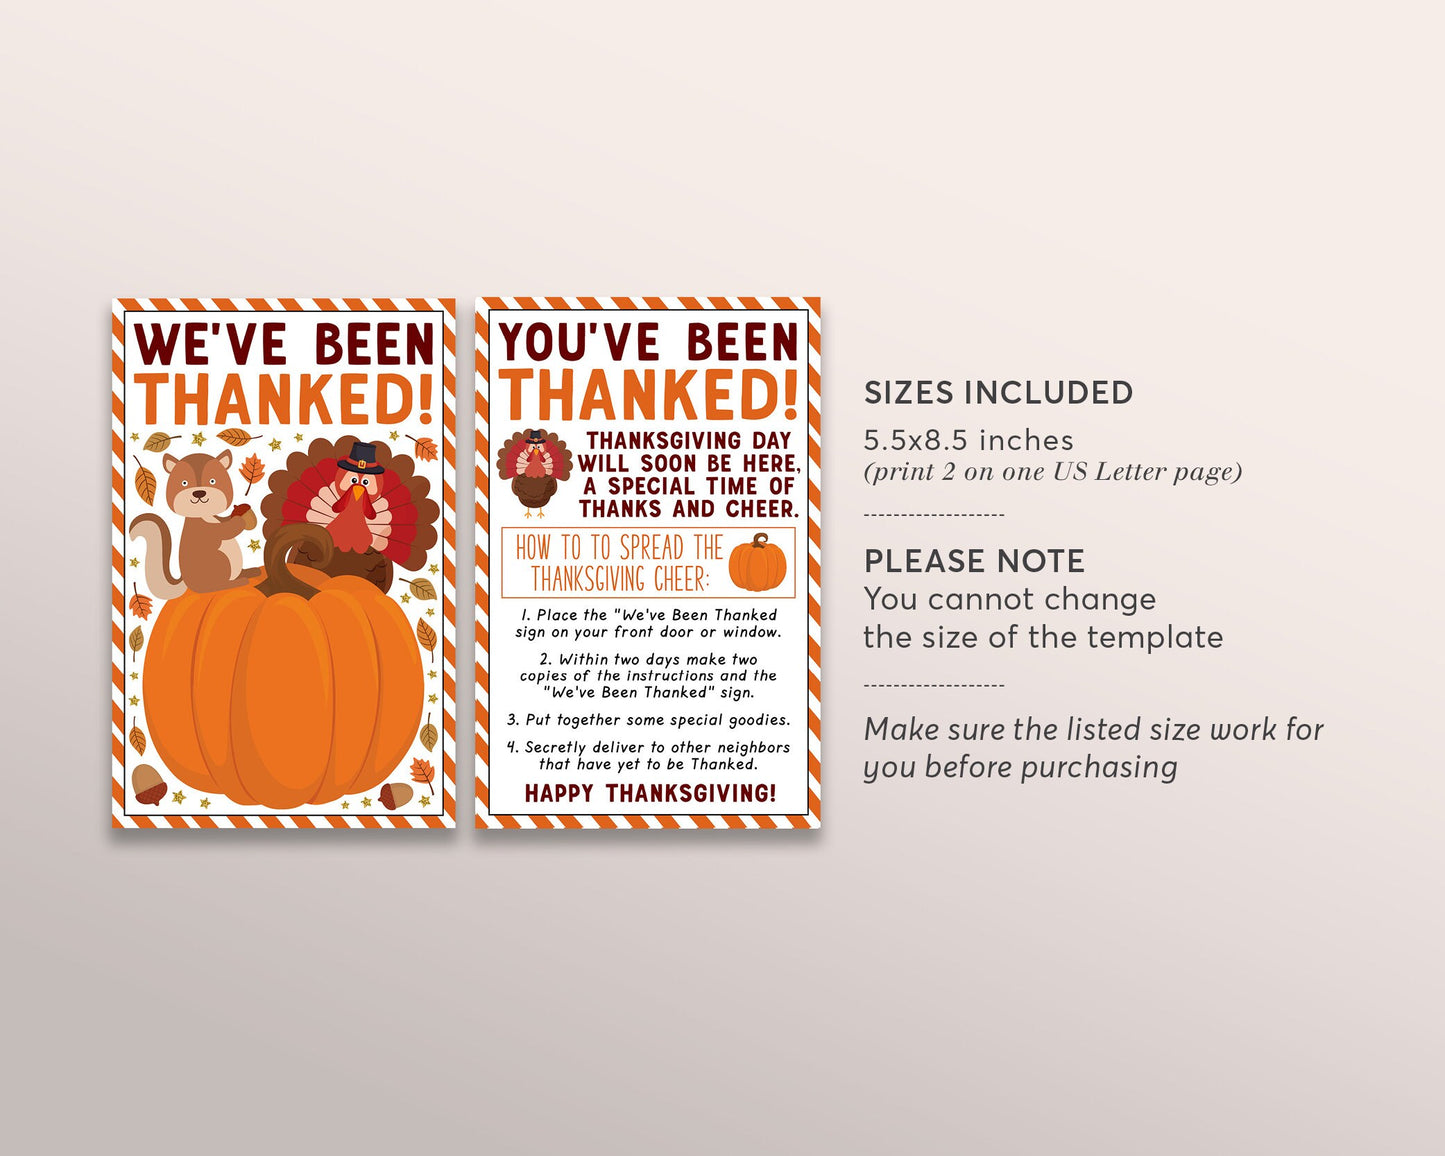 We've Been Thanked Game Editable Template, You've Been Thanked, Thanksgiving Friendsgiving Activity Tradition Sign Instructions Neighbors